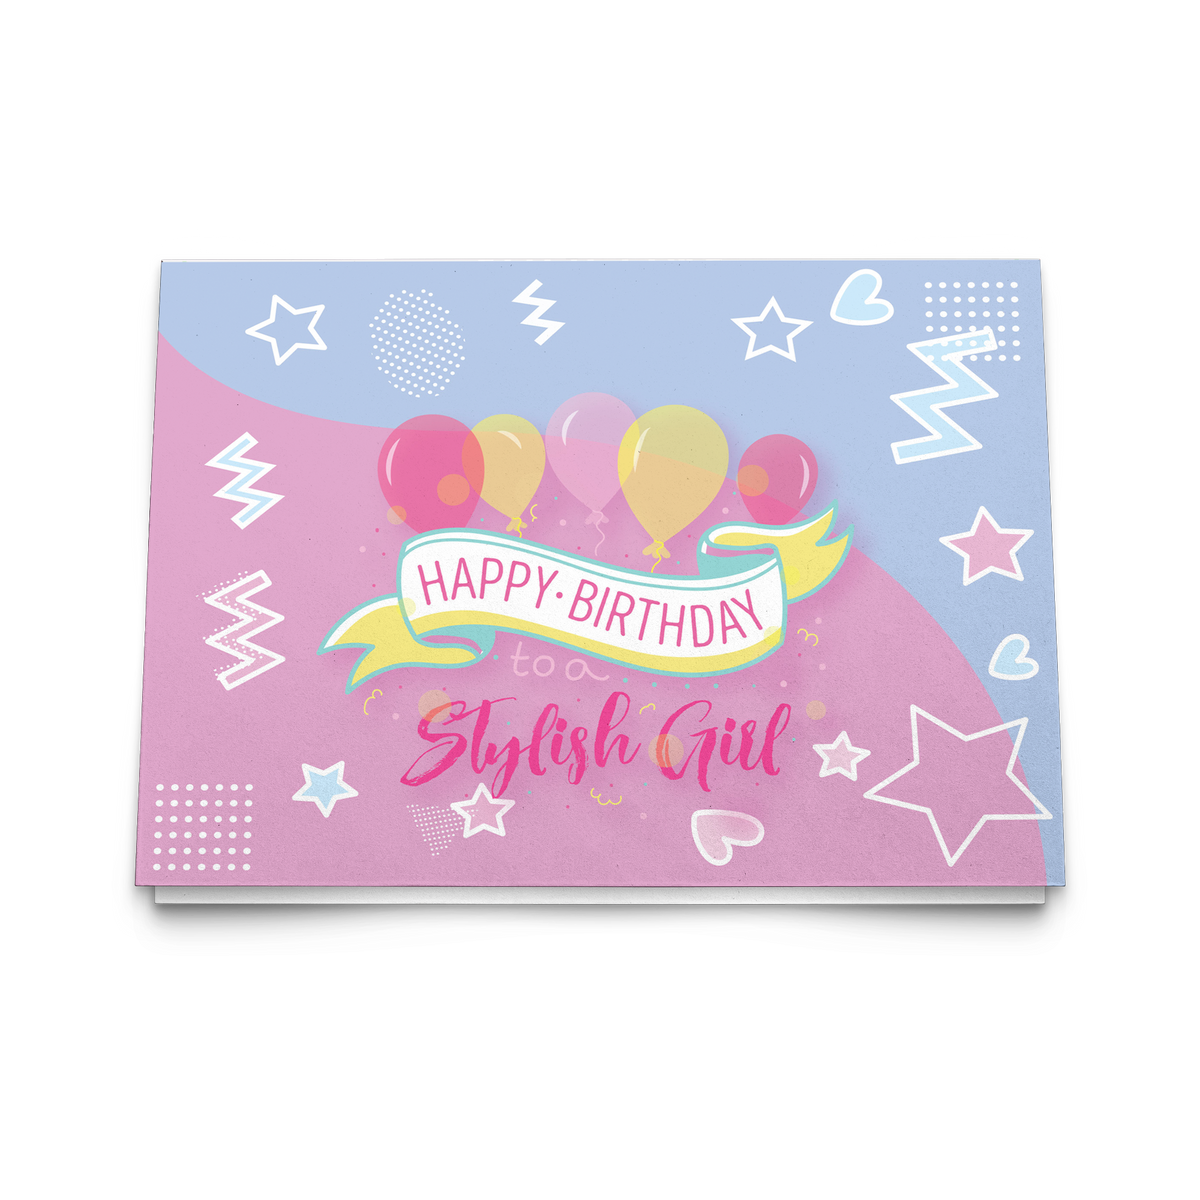 HAPPY BIRTHDAY TO A STYLISH GIRL! NOTE CARD